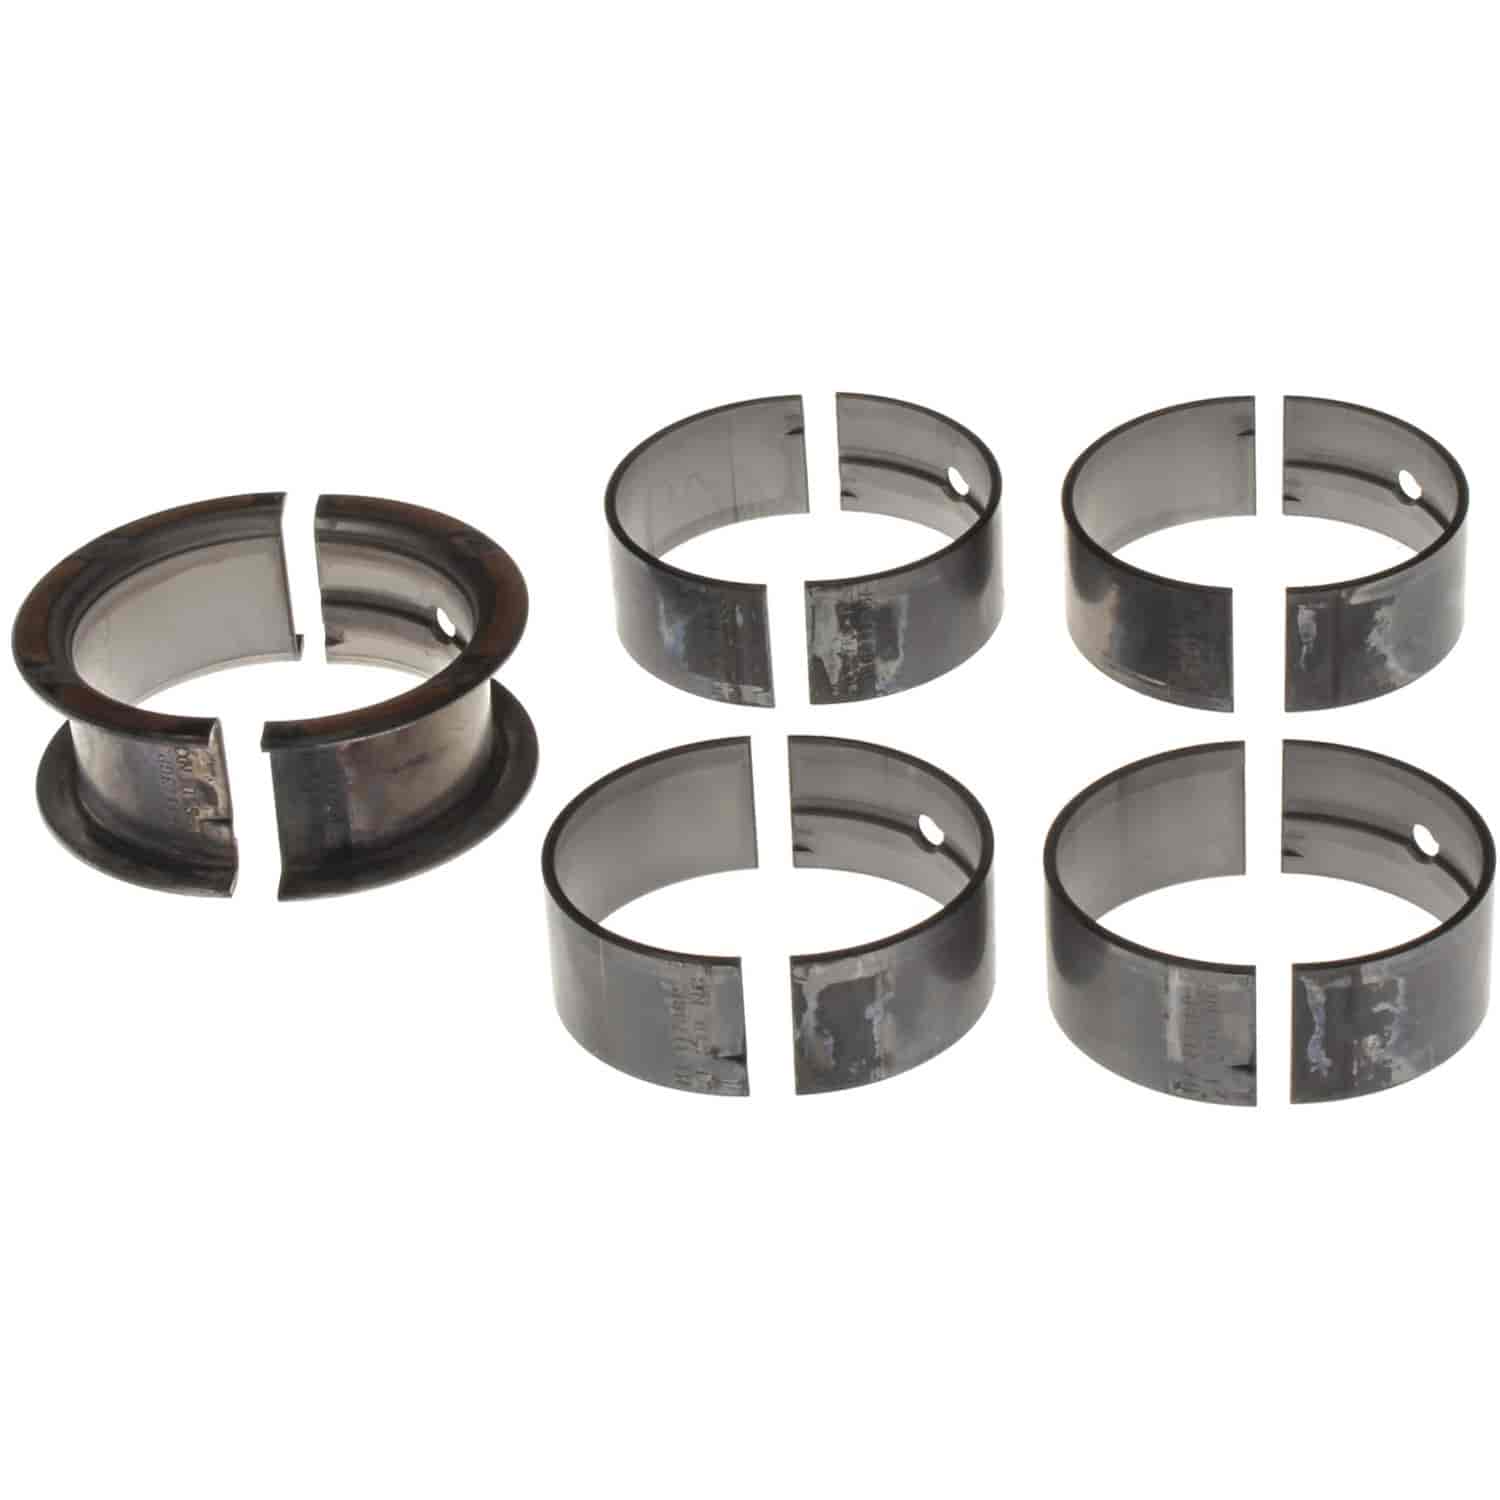 Main Bearing Set Fits Nissan 1982-1989 L4 1.7/1.8/2.0L with Standard Size